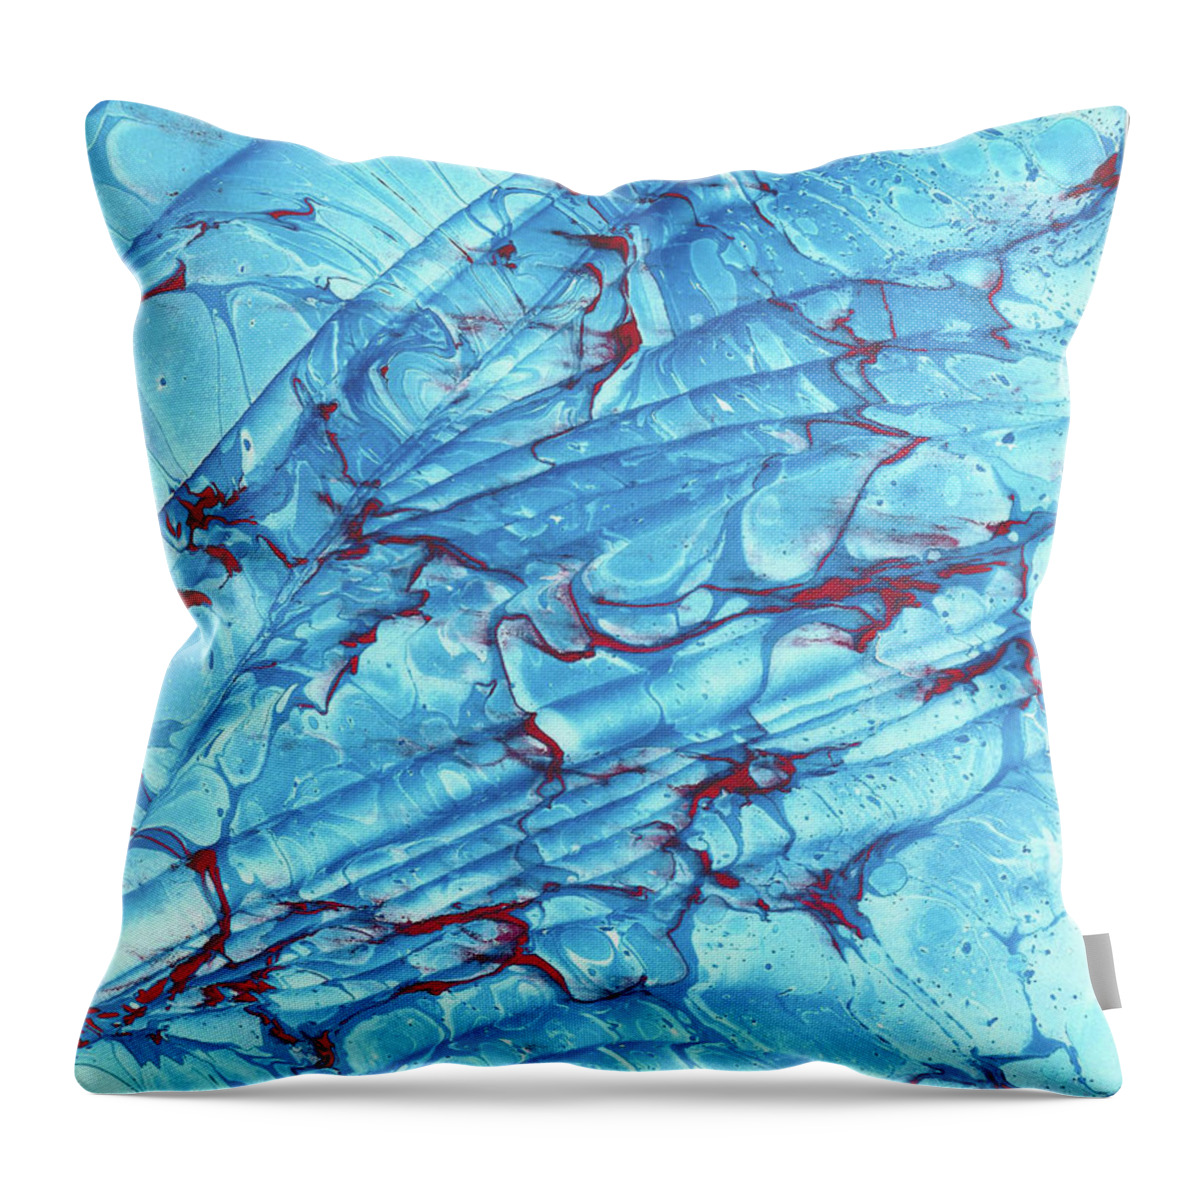 Water Marbling Throw Pillow featuring the painting Blue Wave 9 by Daniela Easter